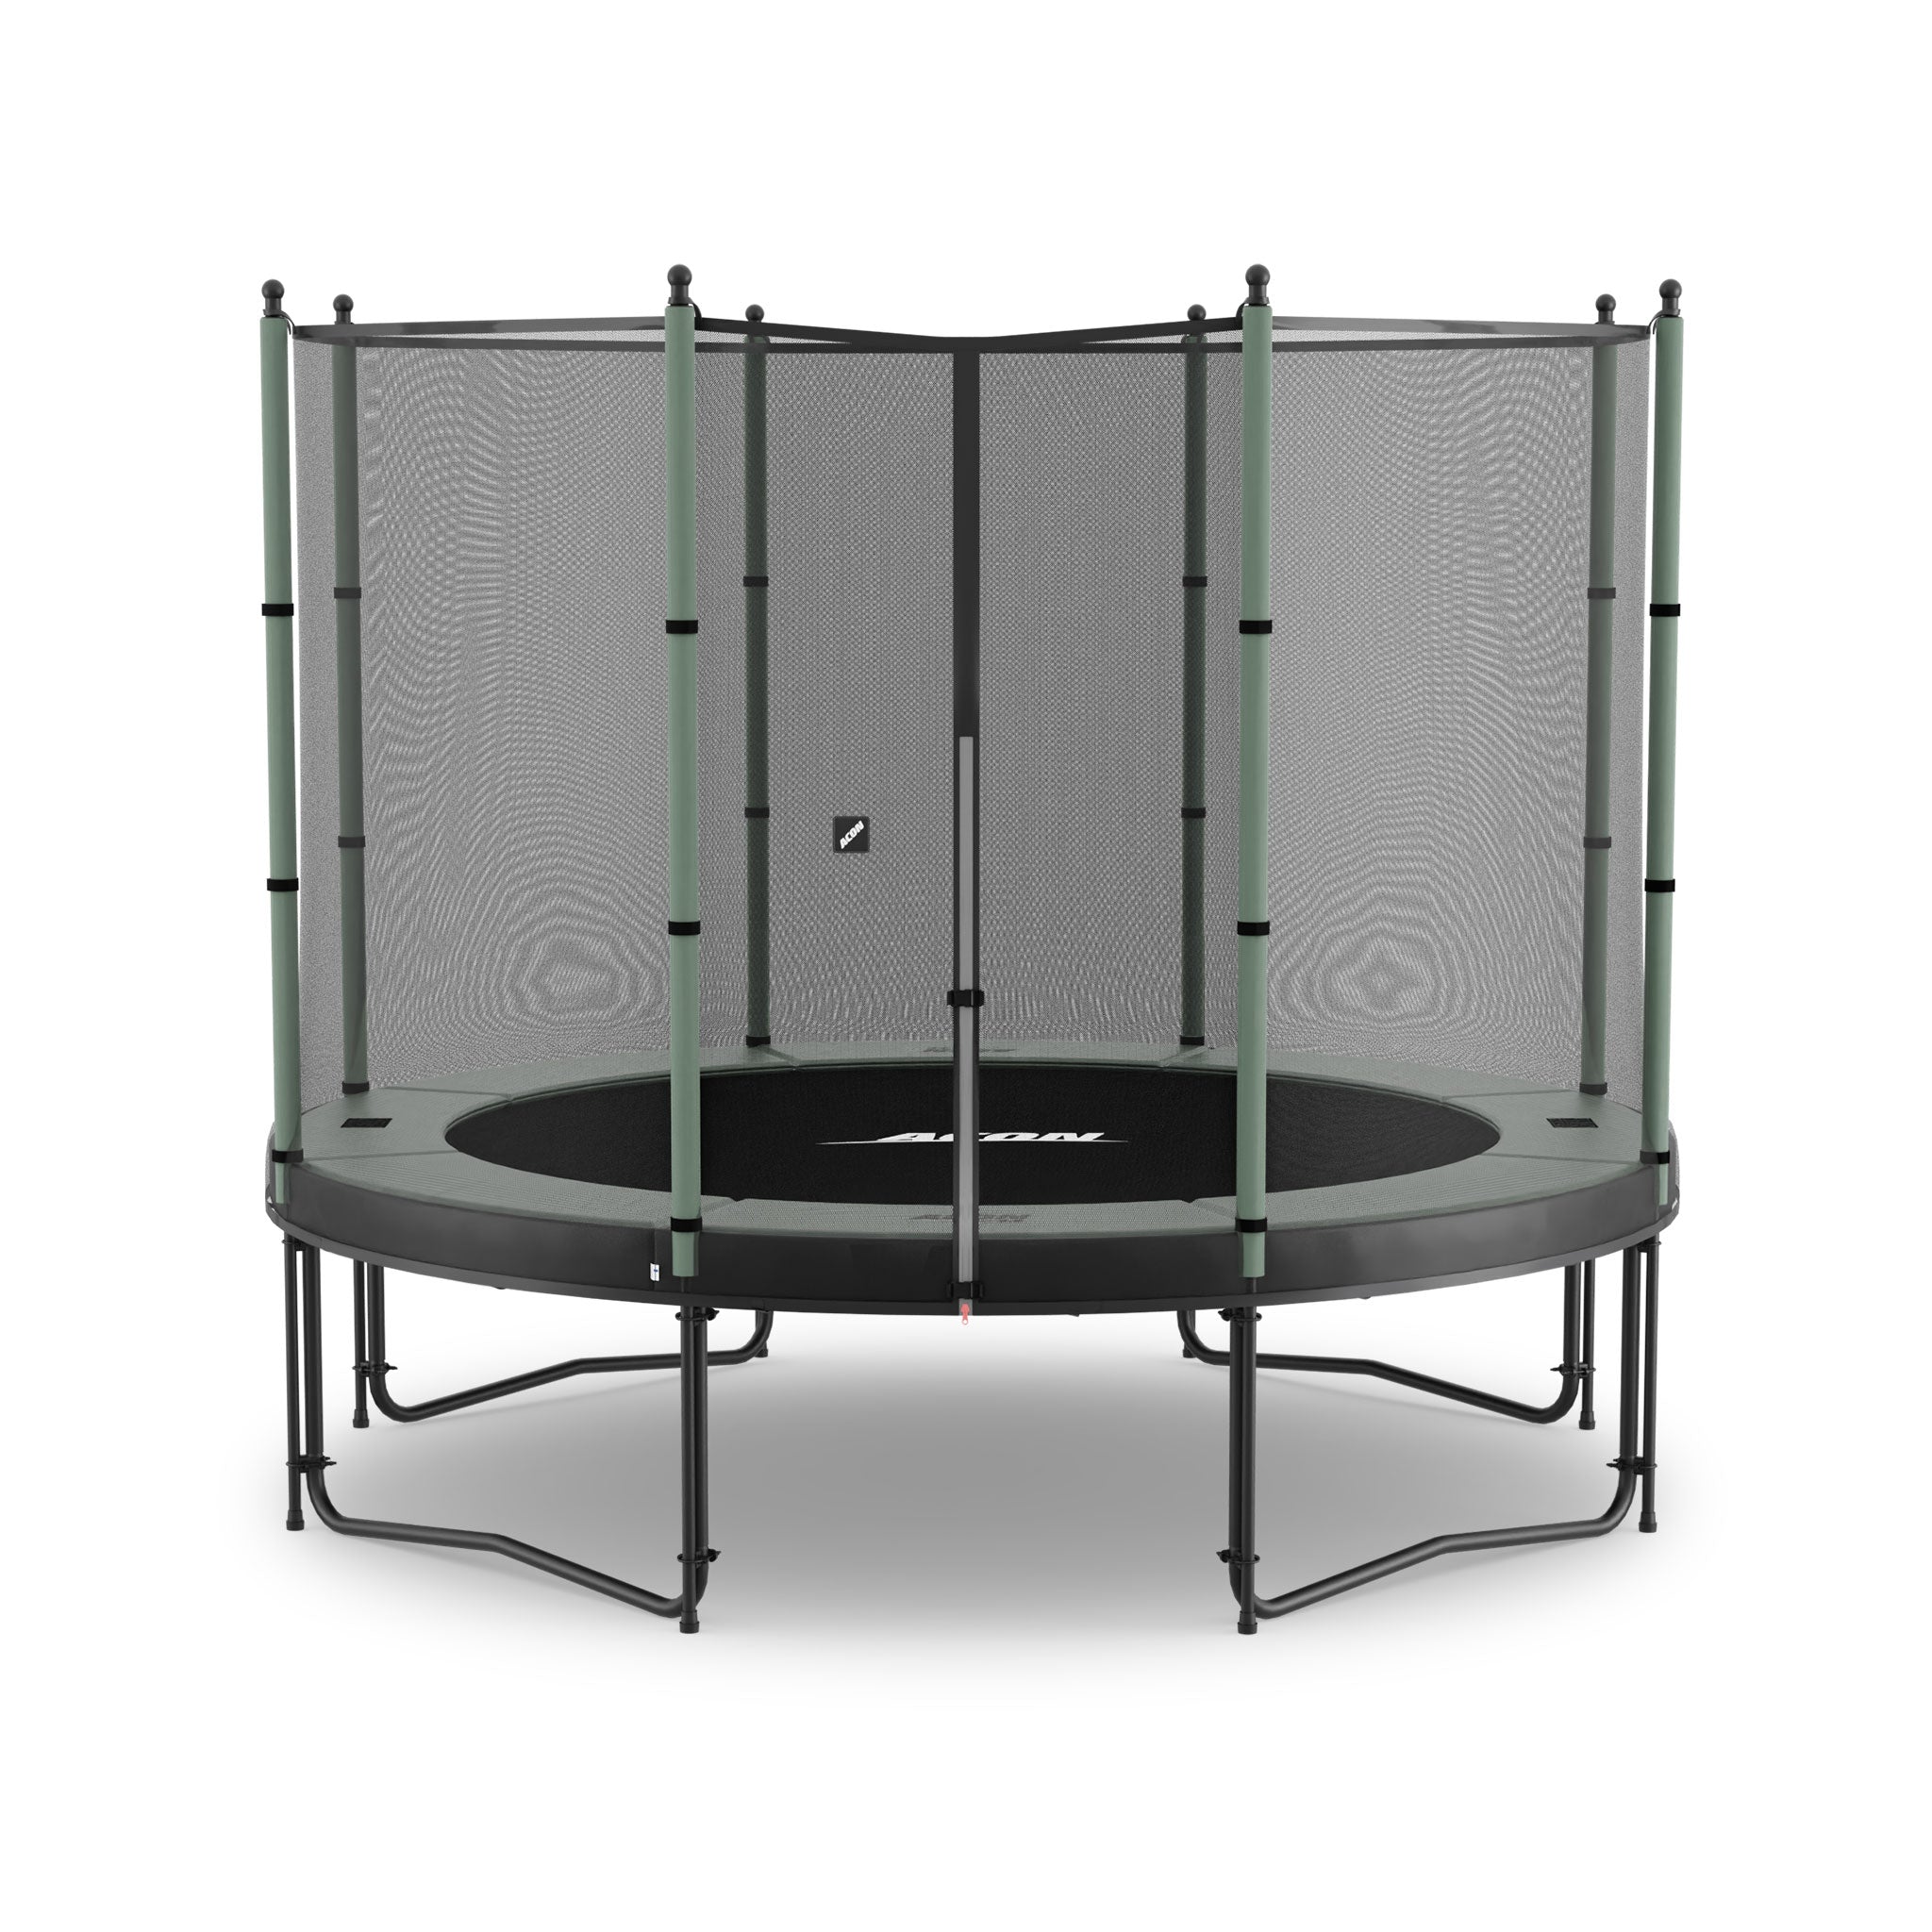 ACON 3m round trampoline with net for small kids and beginners in jumping on a trampoline 